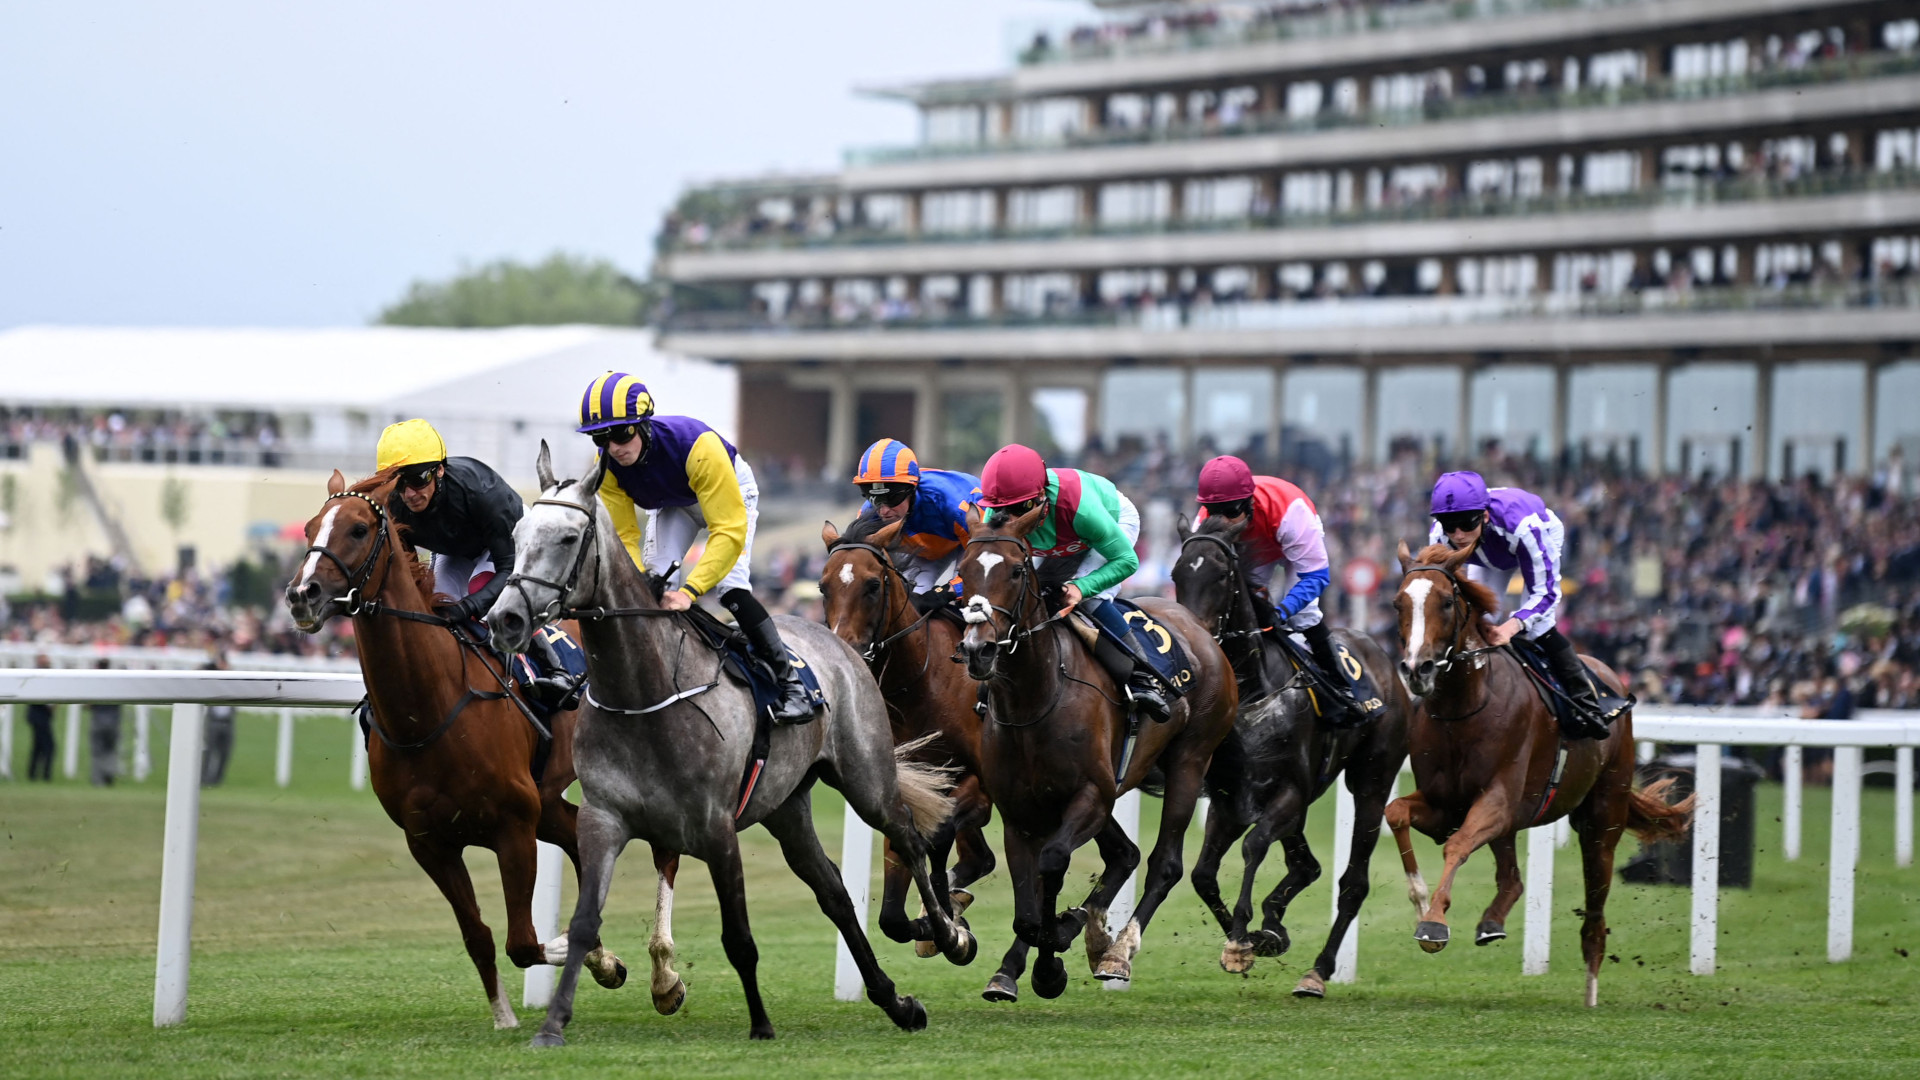 Royal Ascot live stream how to watch the 2022 horse racing for free